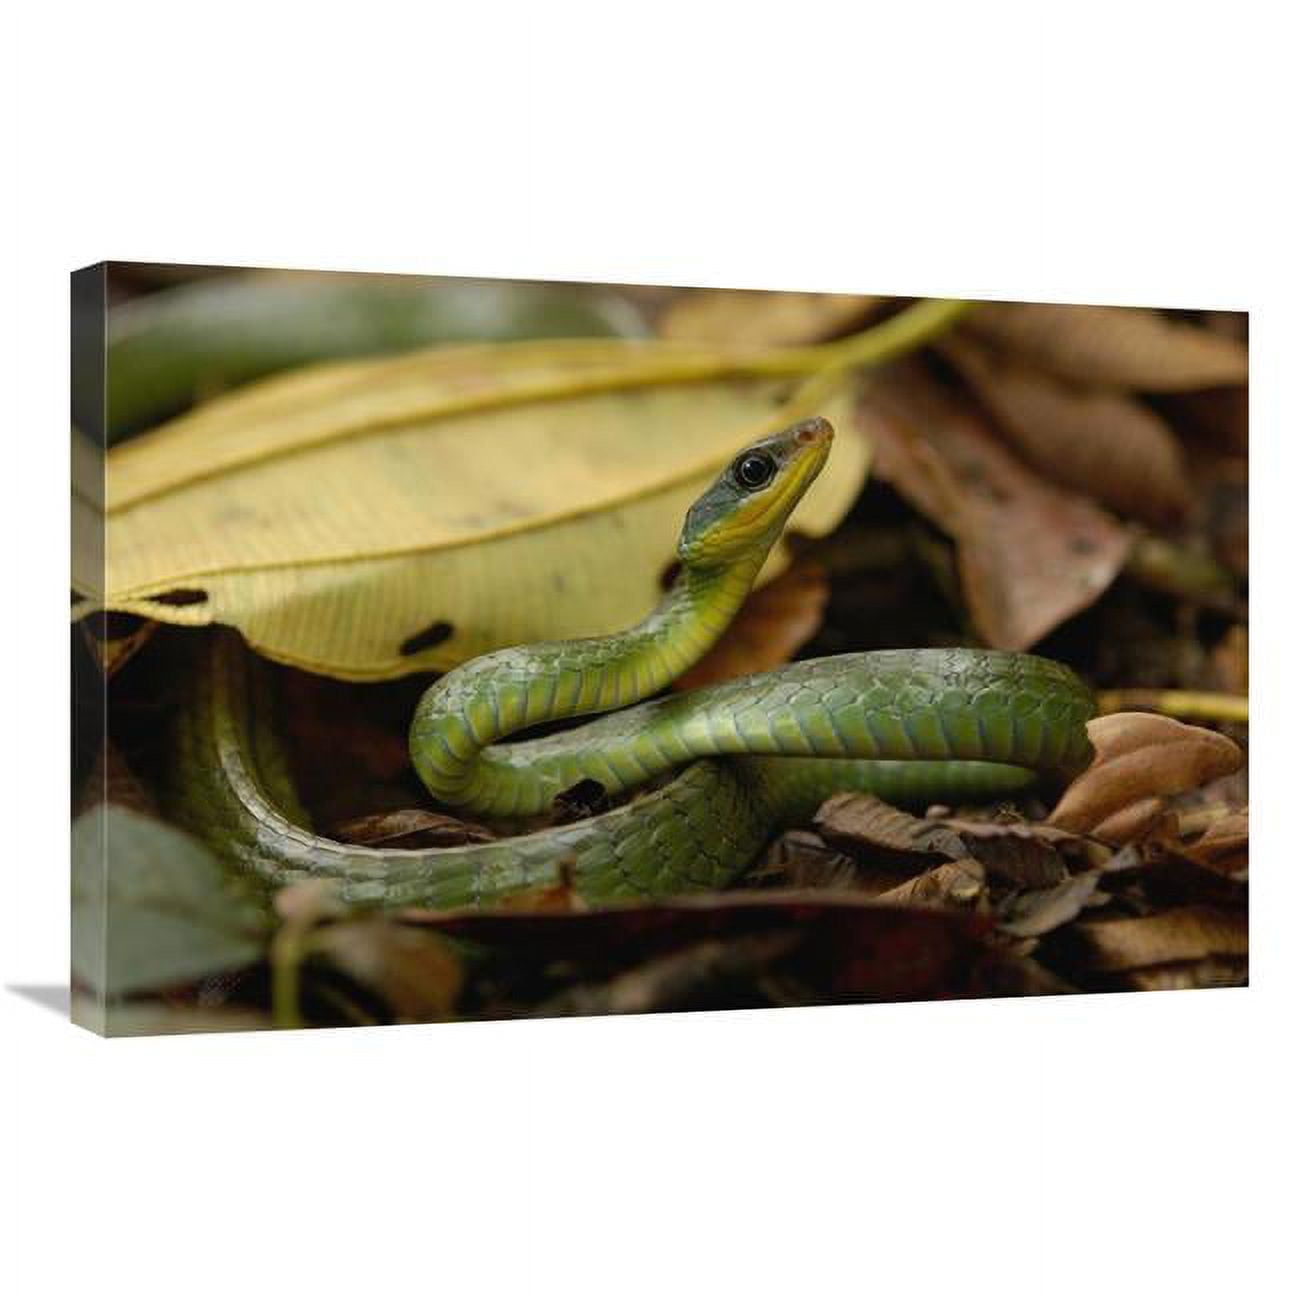 Global Gallery GCS-453200-2030-142 20 x 30 in. Mountain Sipo Coiled Among Leaf Litter, Mindo Cloud Forest, Ecuador Art Print - Pete Oxford